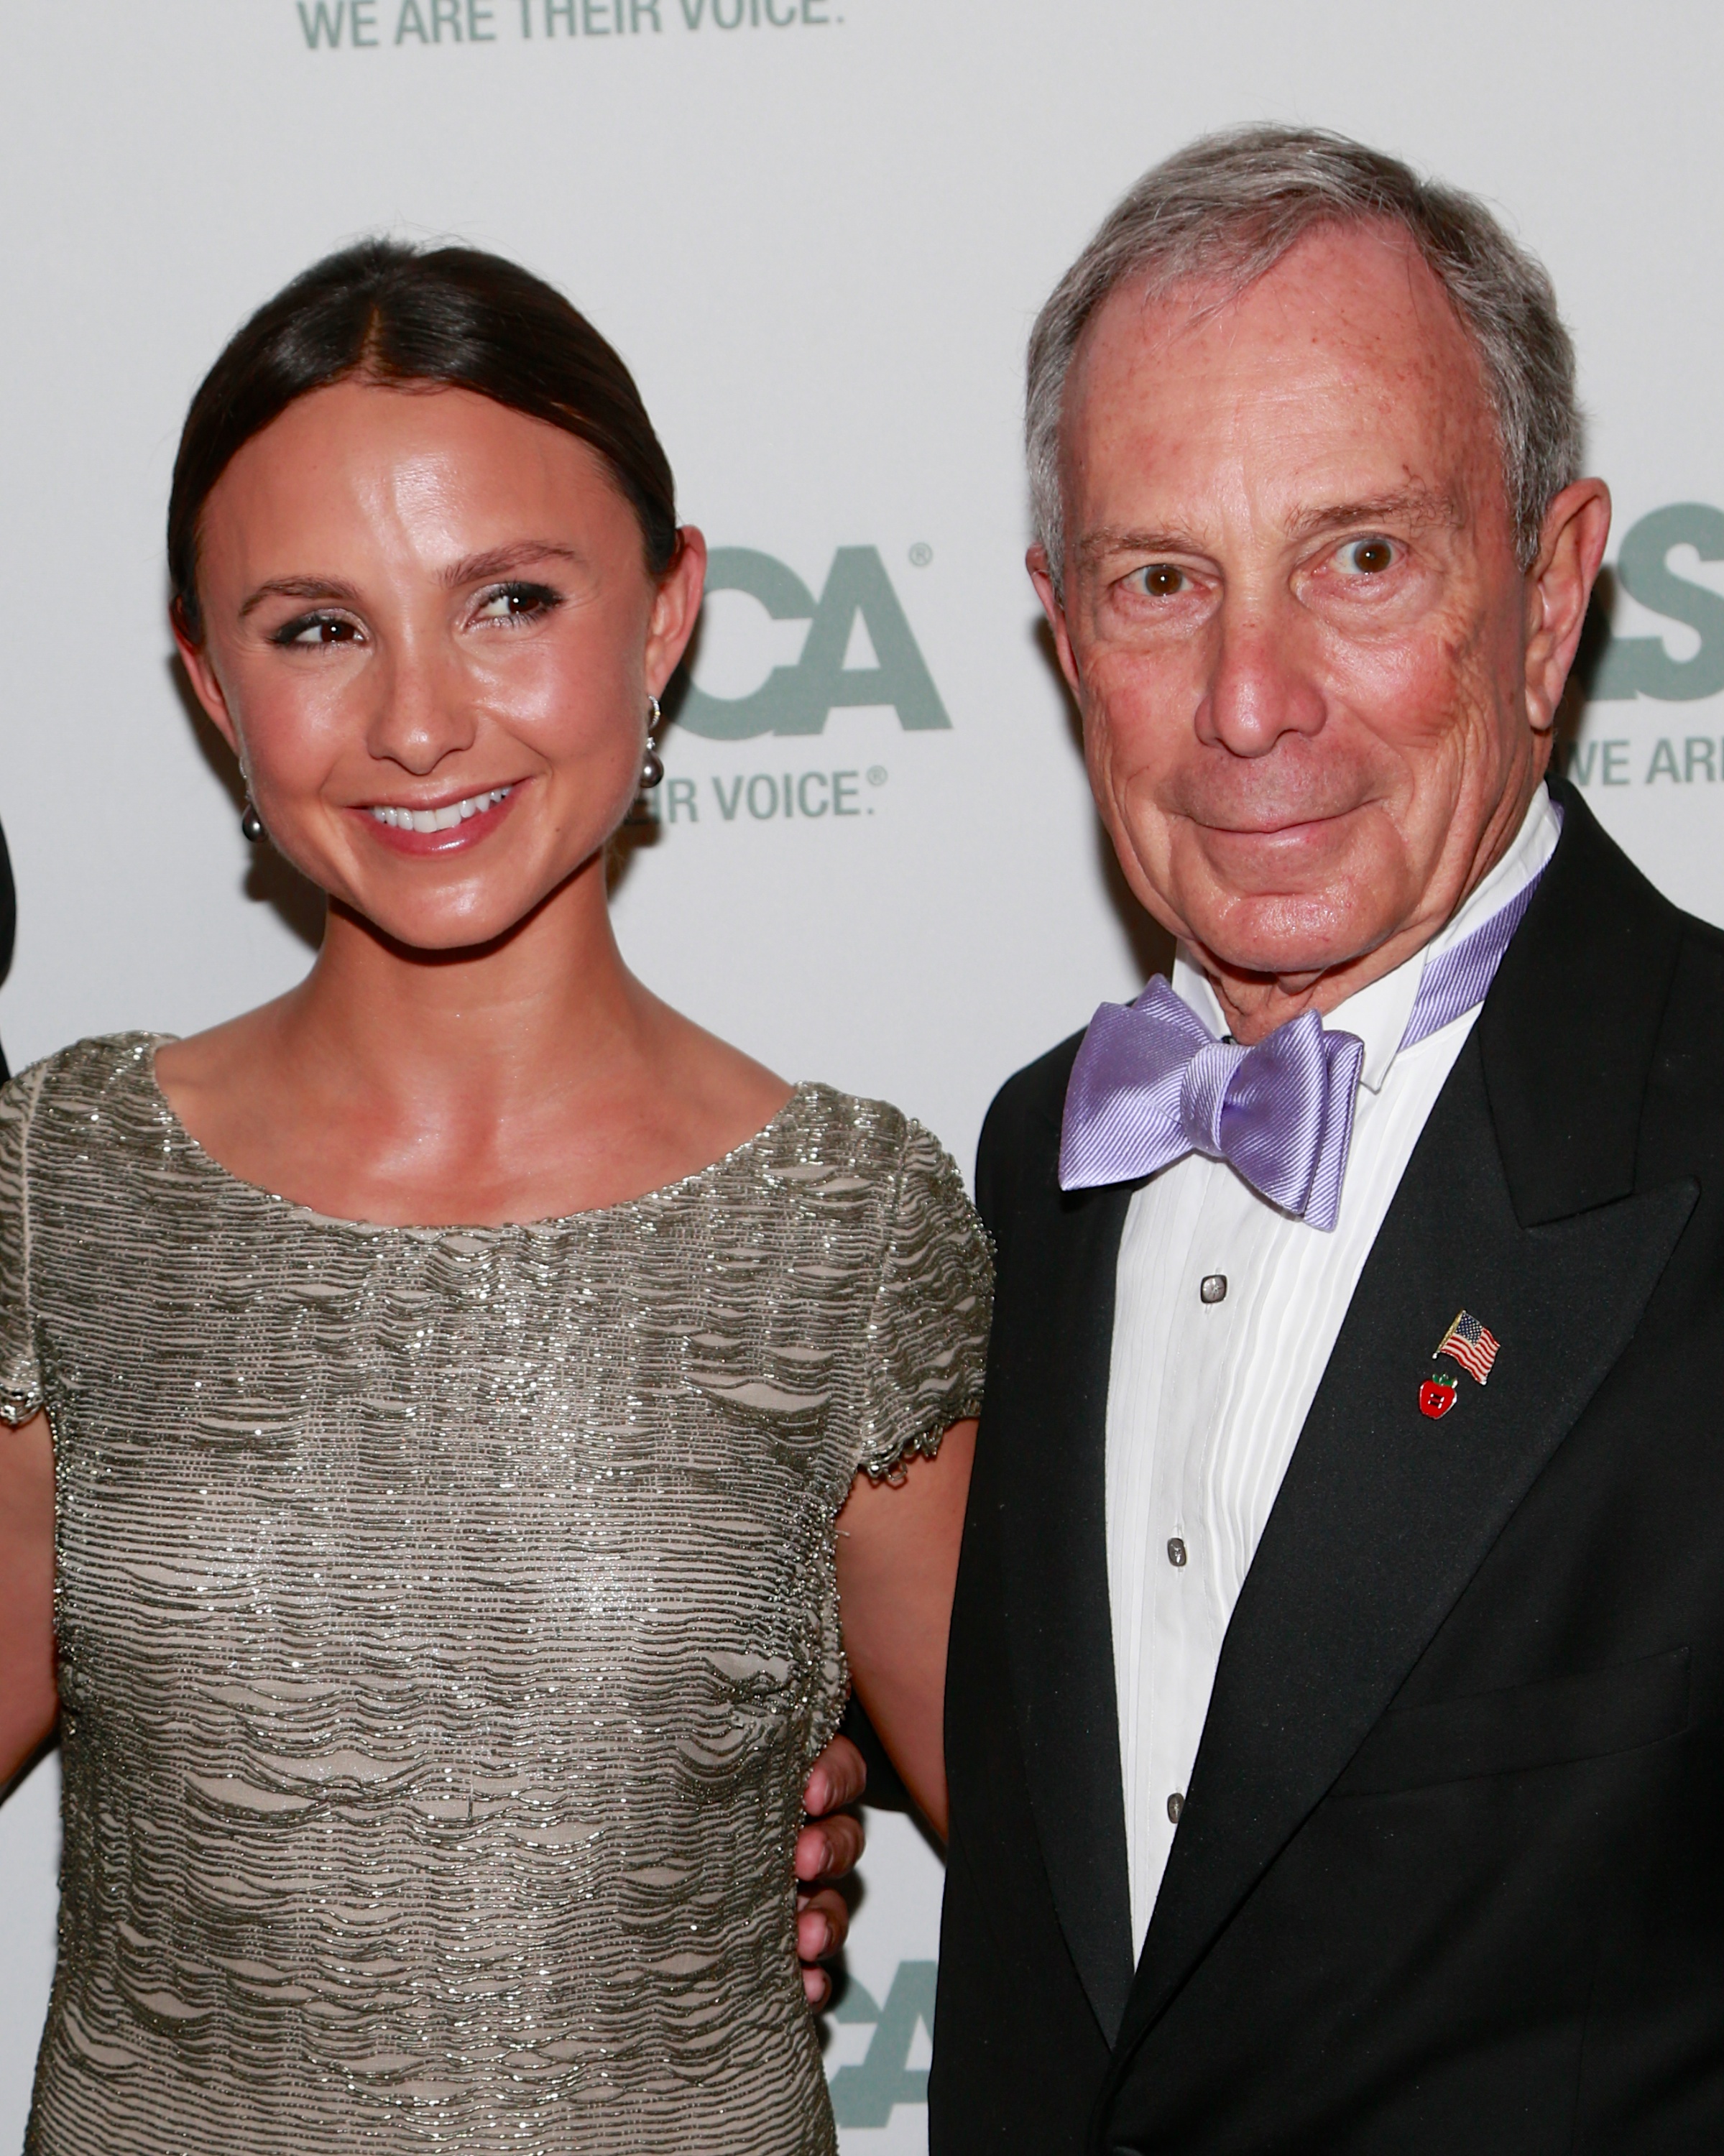 Georgina Bloomberg Says She Regrets Not Taking Her Father's Advice on College